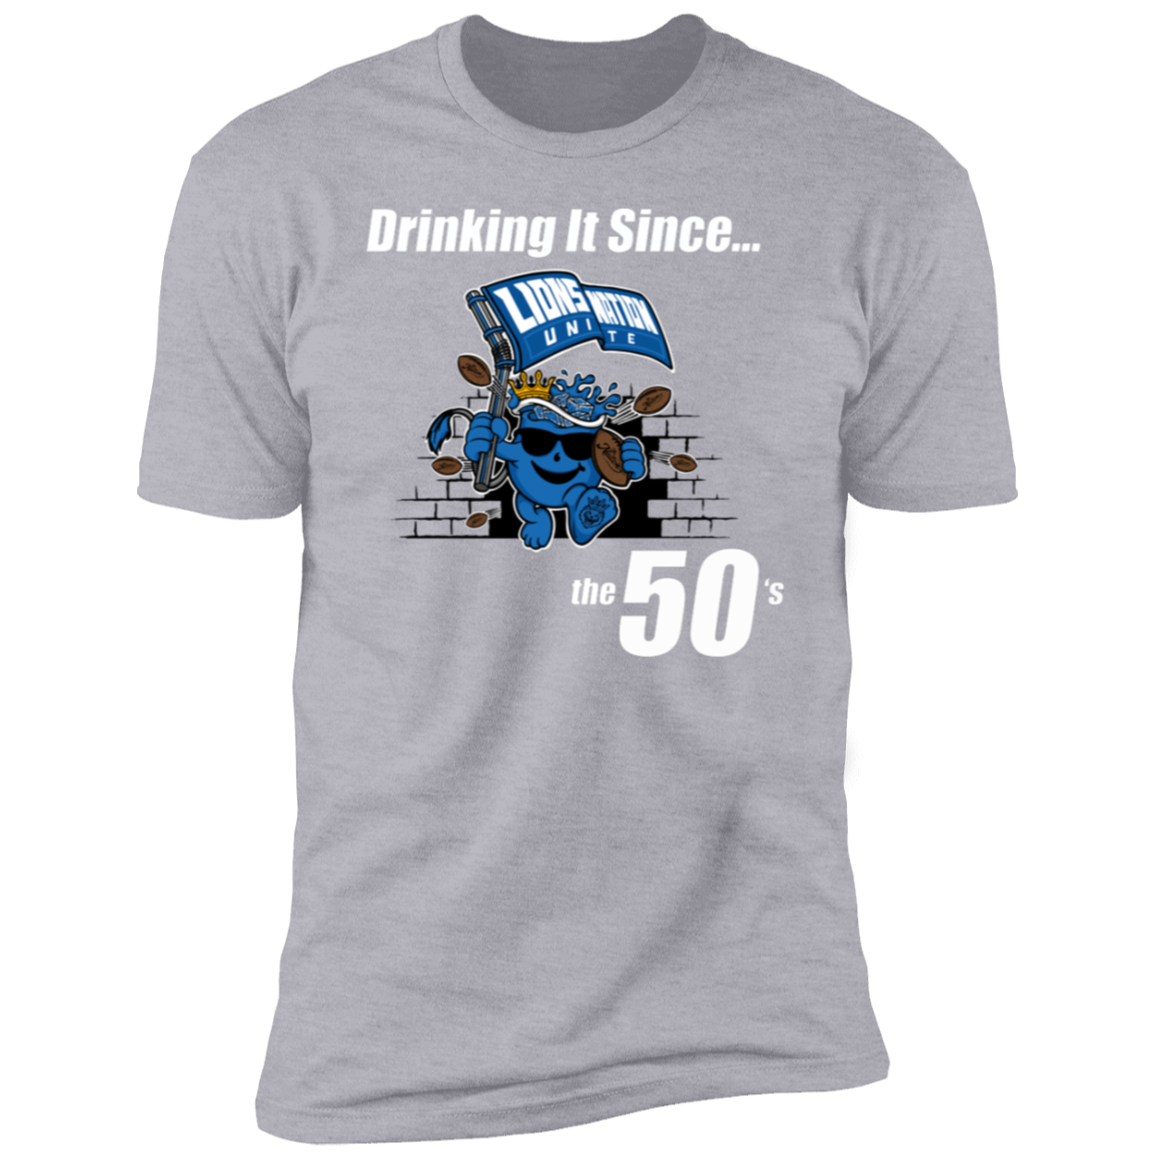 Drinking It Since the 50's Men's T-Shirt